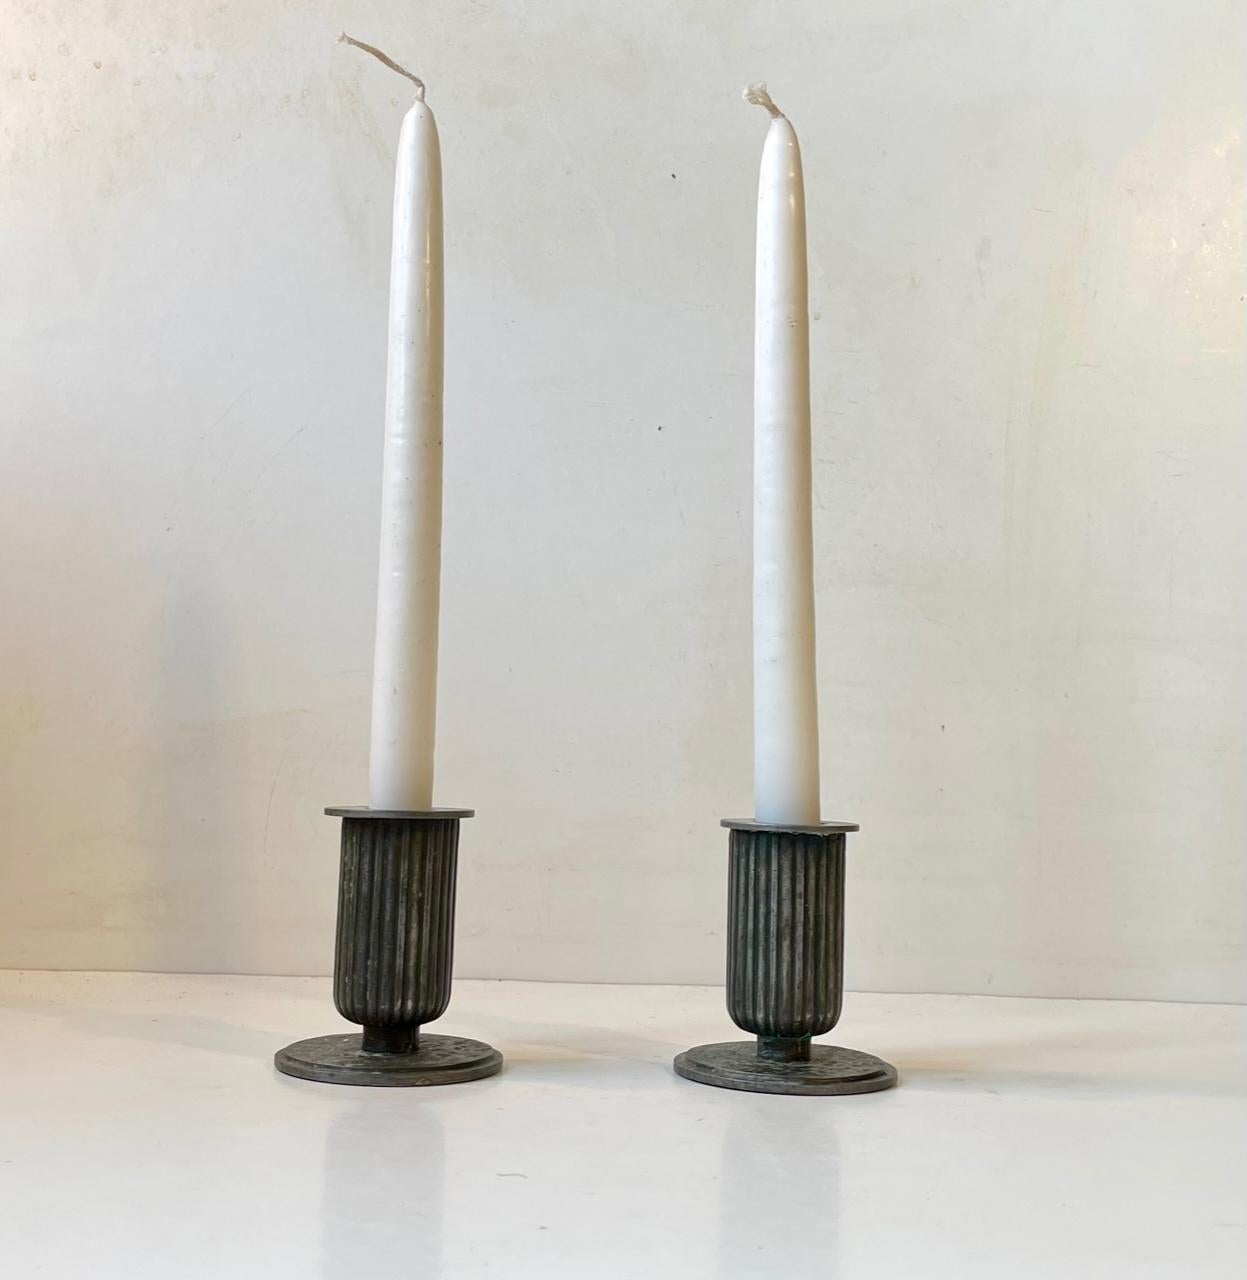 Early 20th Century Art Deco Corinthian Column Candlesticks in Pewter, Sweden 1920s For Sale